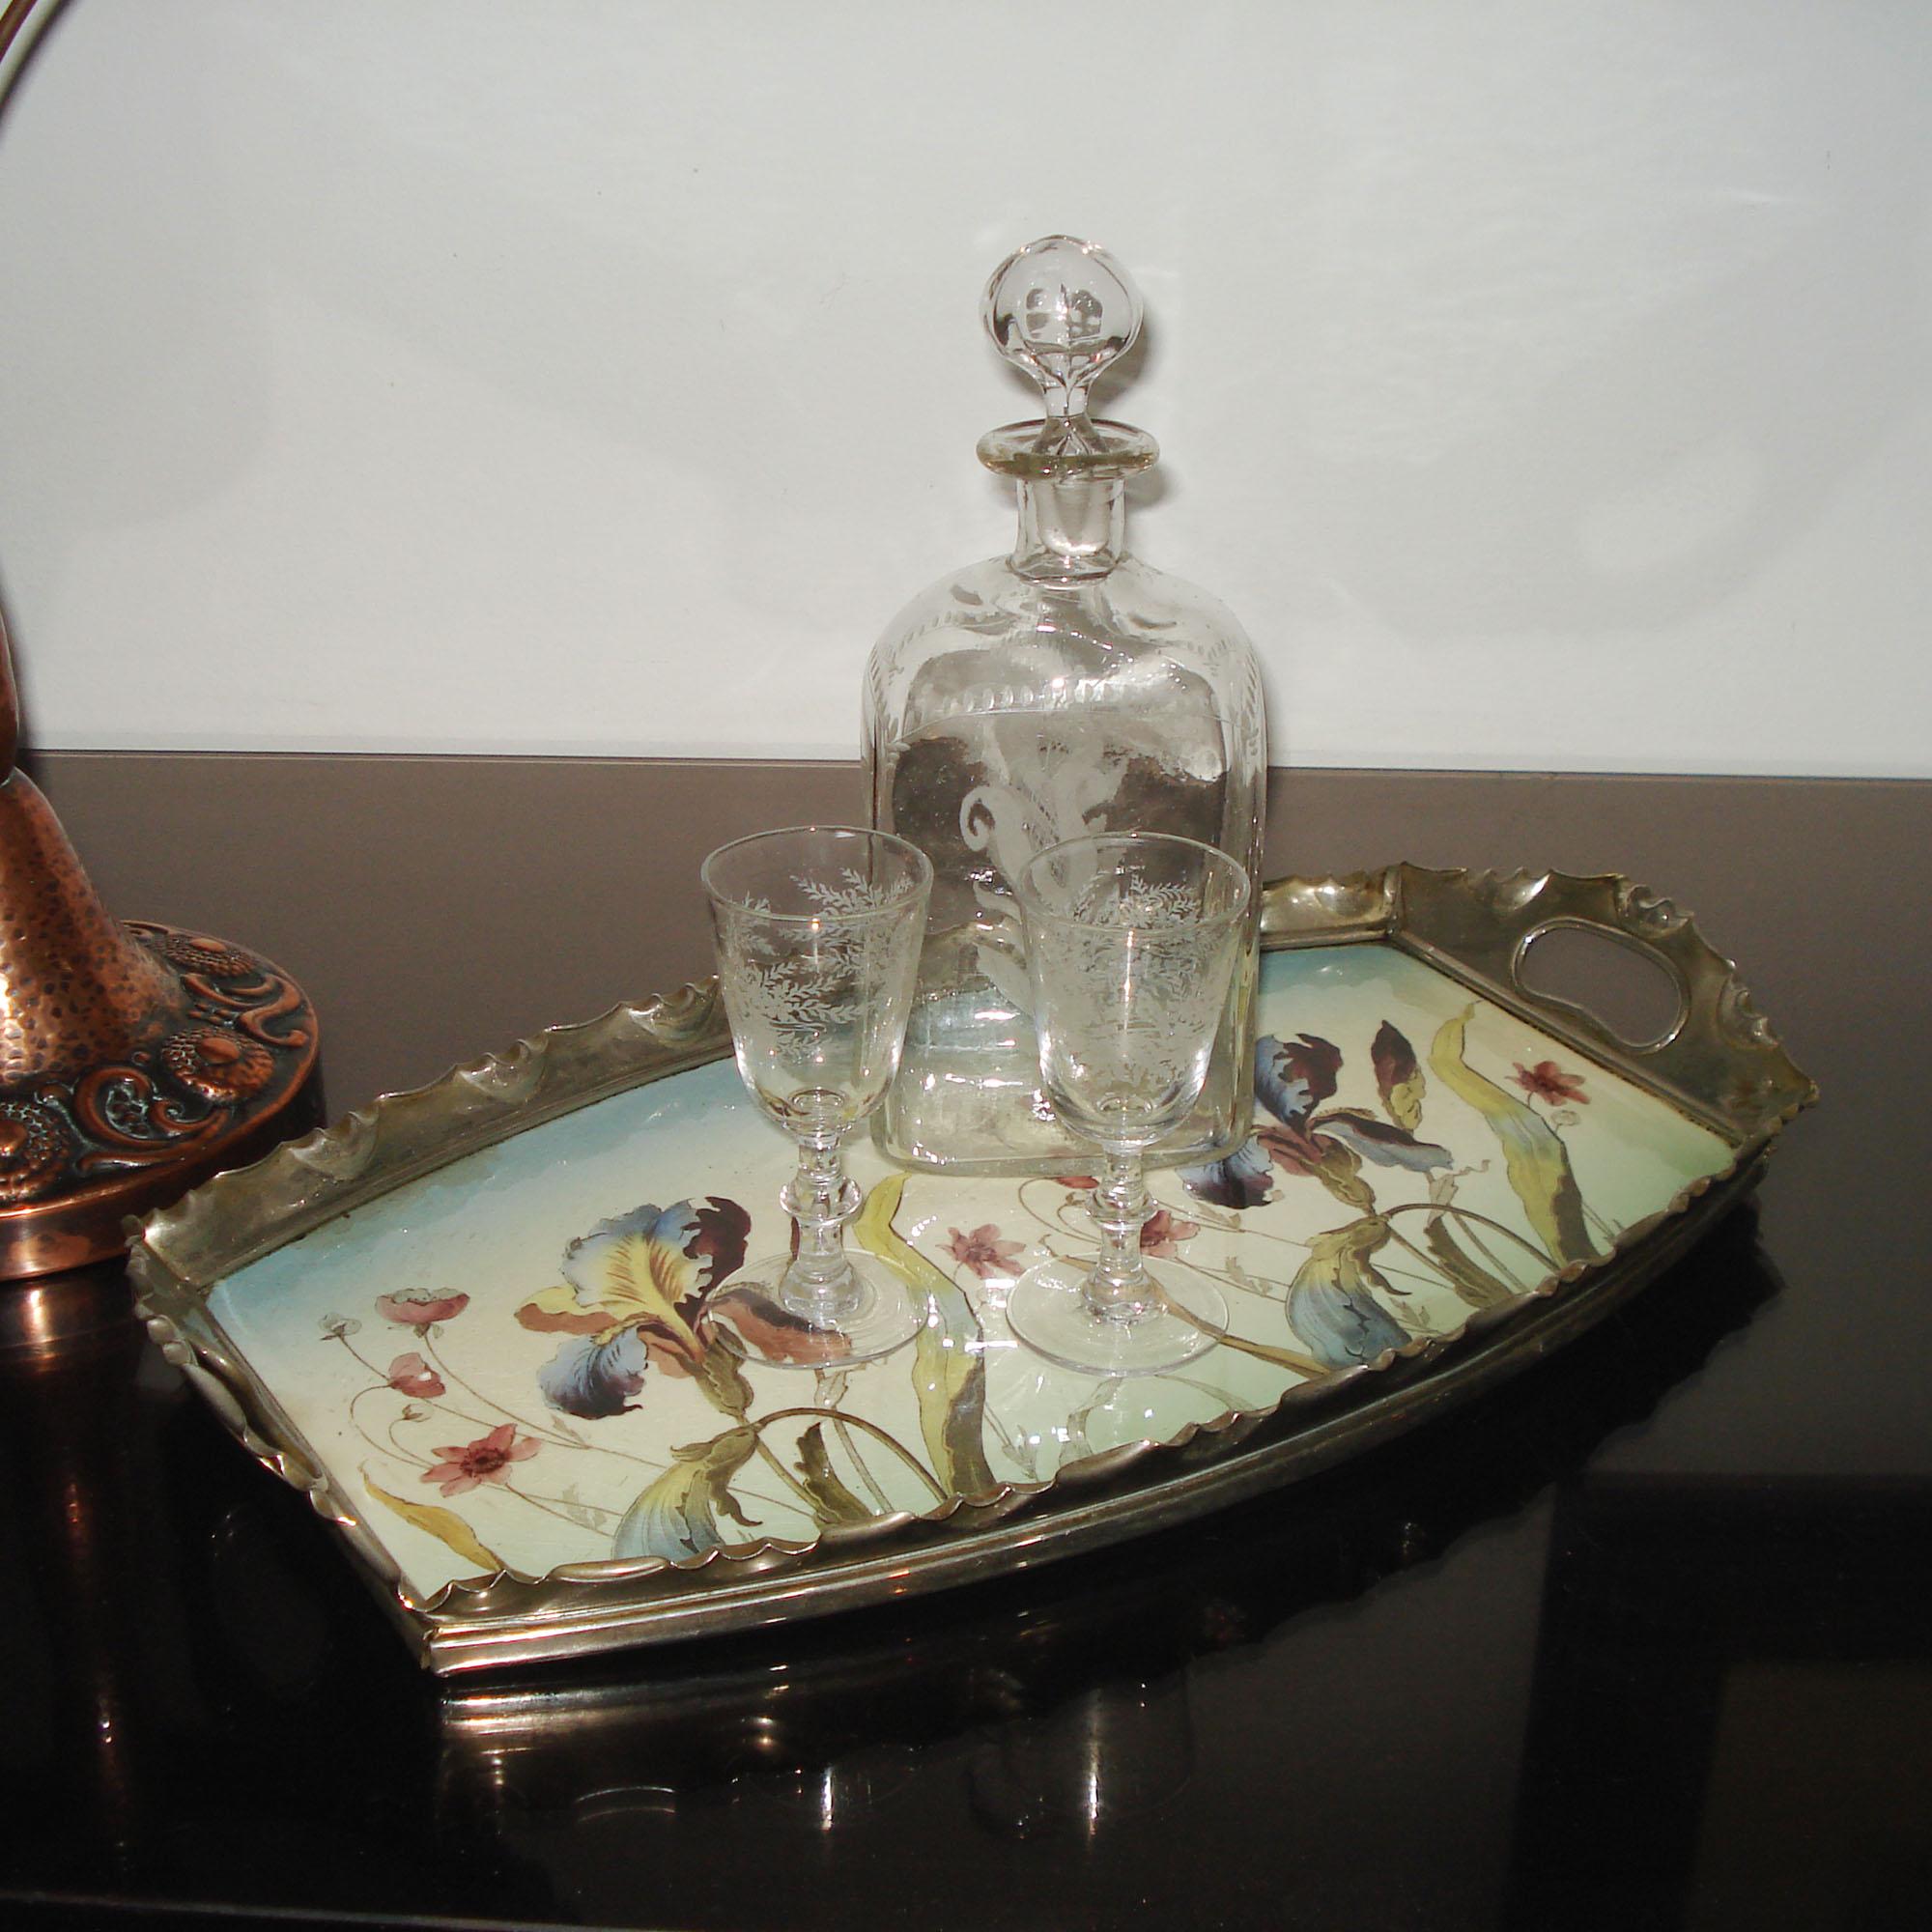 Art Nouveau Porcelain and Pewter Tray by Max Dannhorn, Villeroy & Boch for Nürnberger Metallwarenfabrik Max Dannhorn.
An Art Nouveau serving tray, beautifully polychrome transfer decoration with iris, silver-plated pewter mount.
Traces of